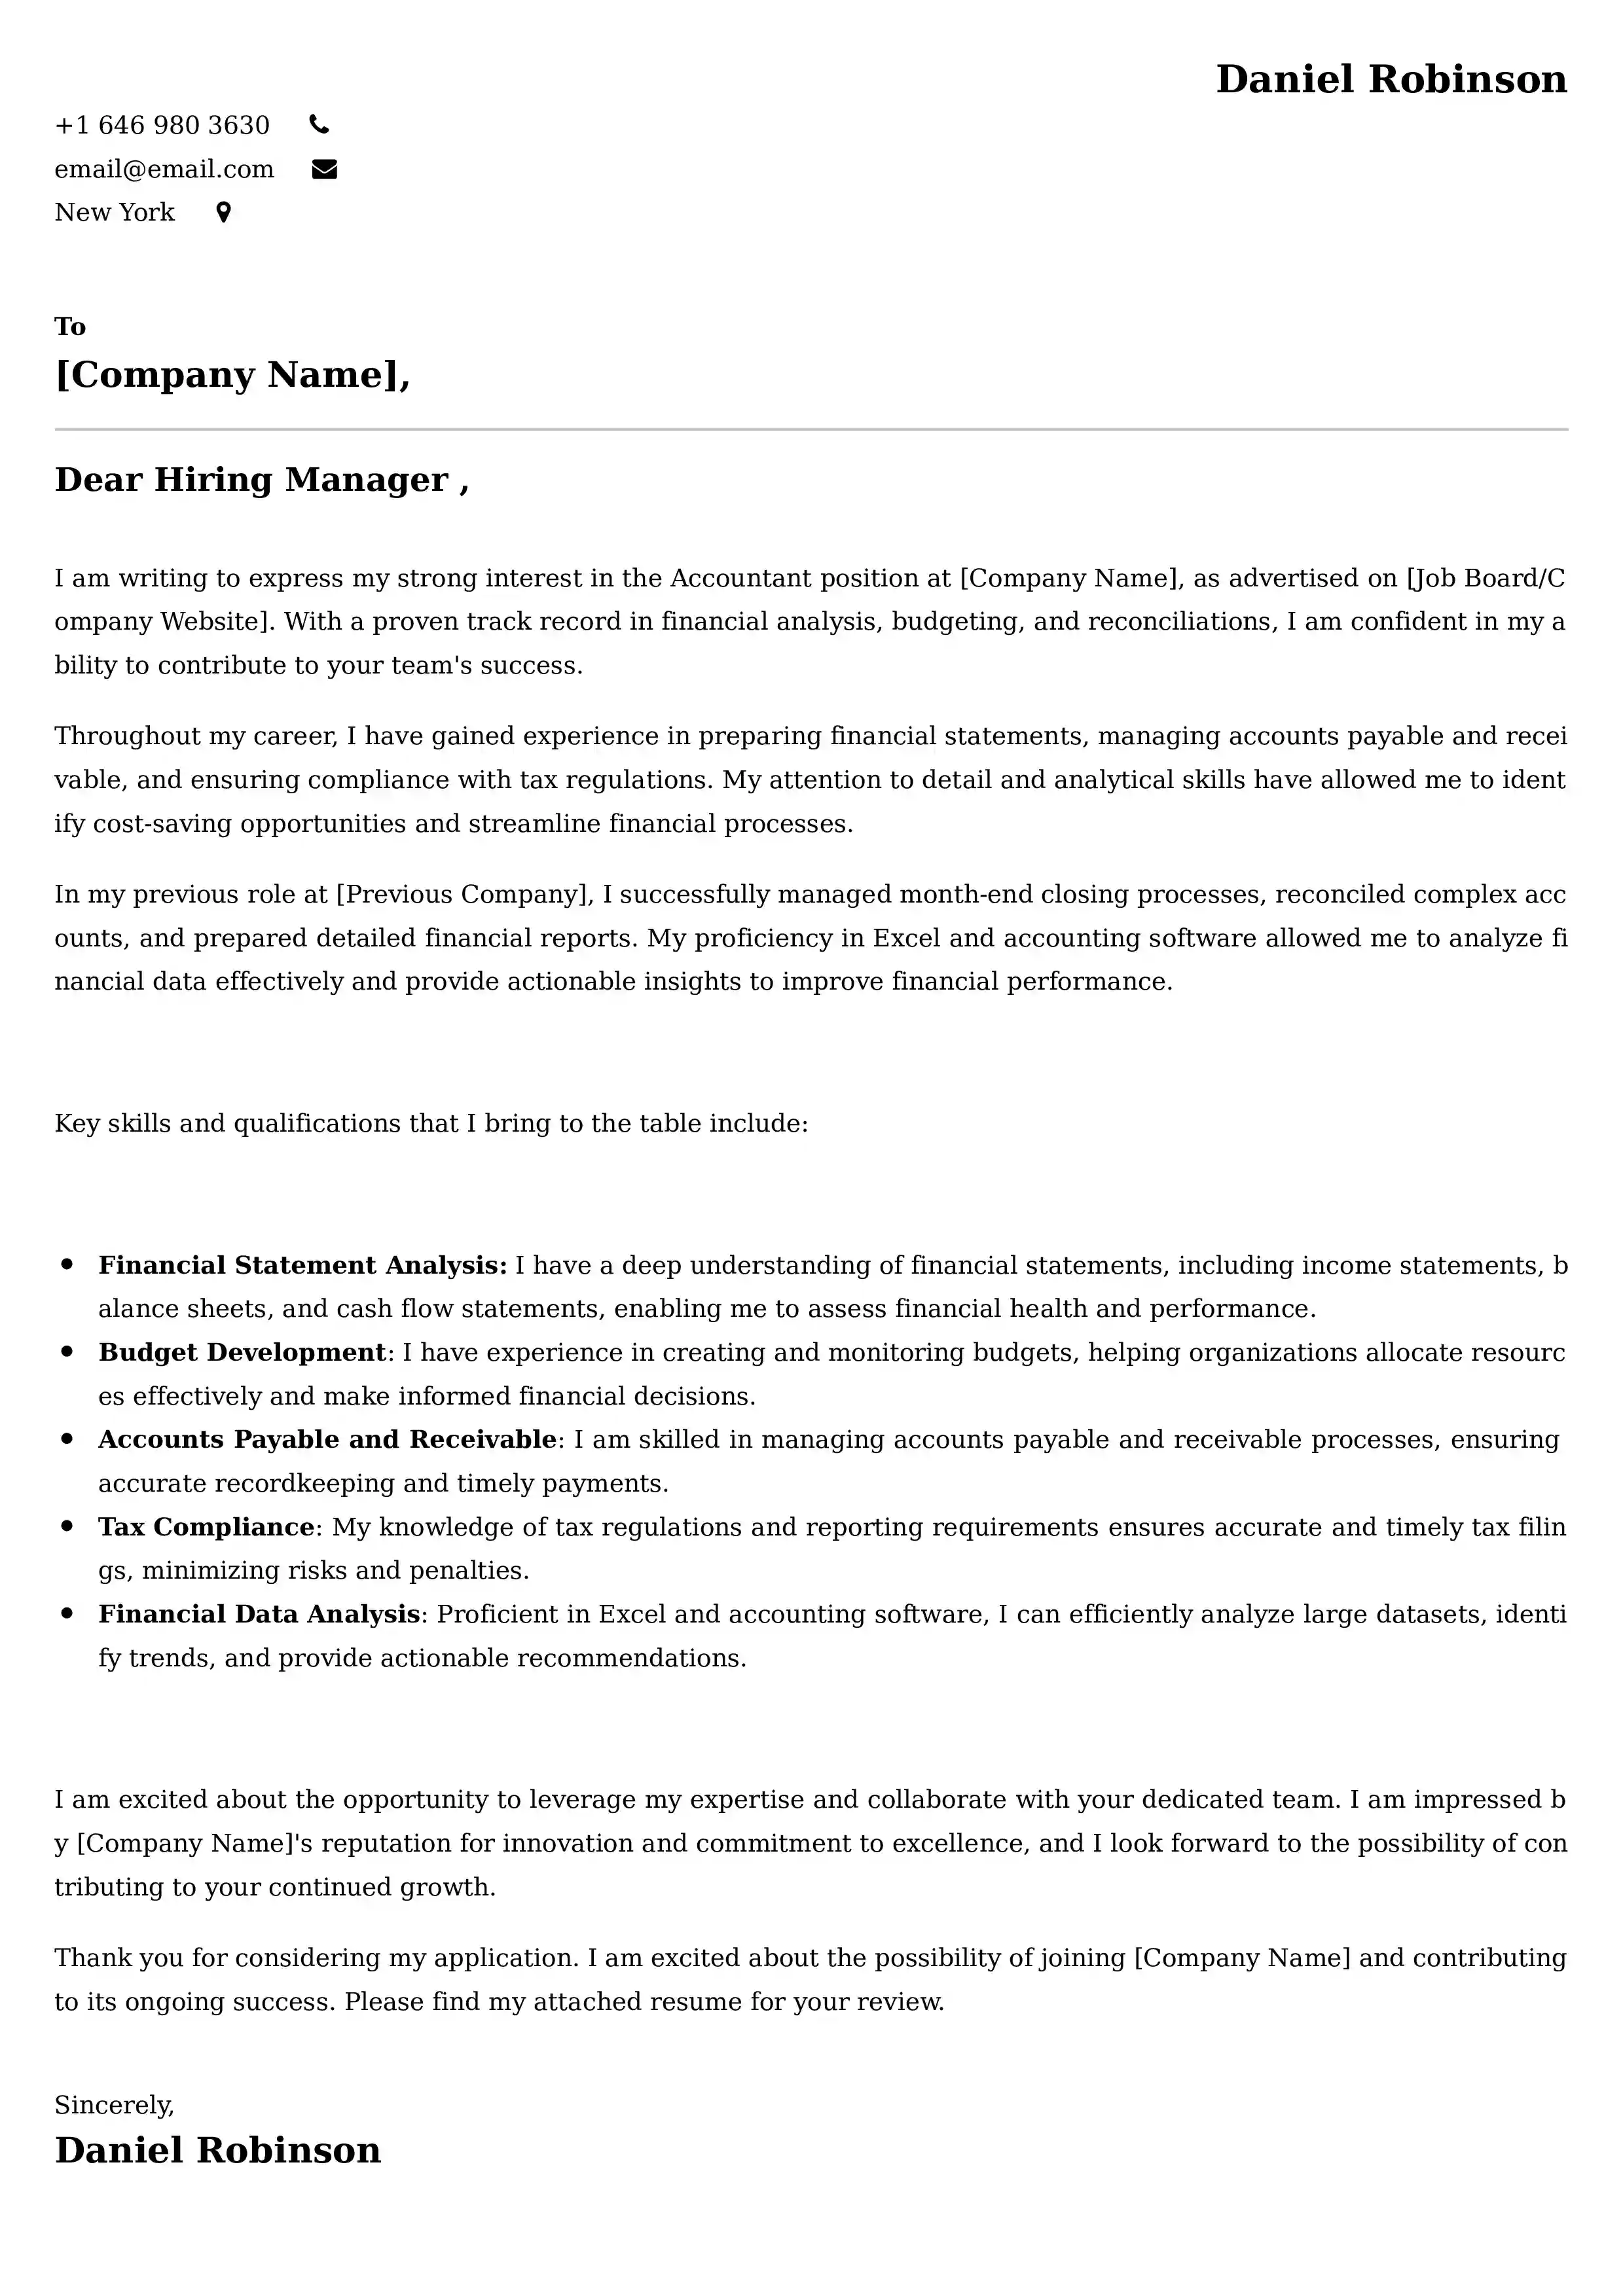 Accountant Cover Letter Examples - Latest UK Format